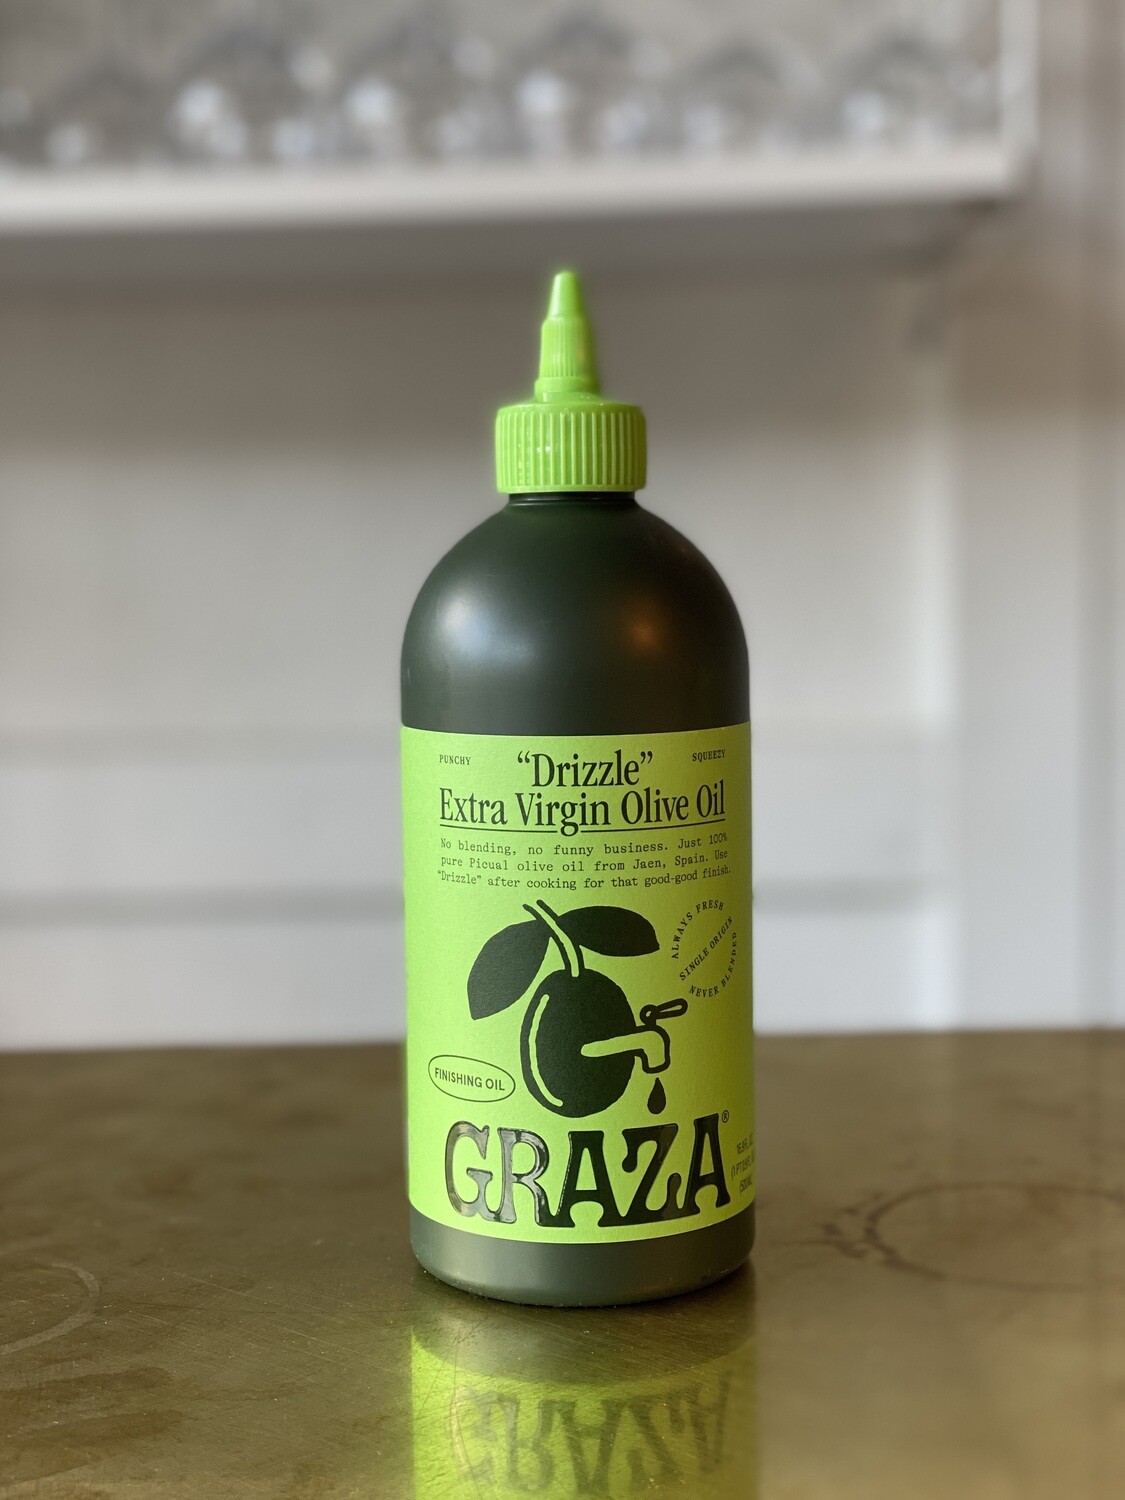 Graza 'Drizzle' Extra Virgin Olive Oil for Finishing